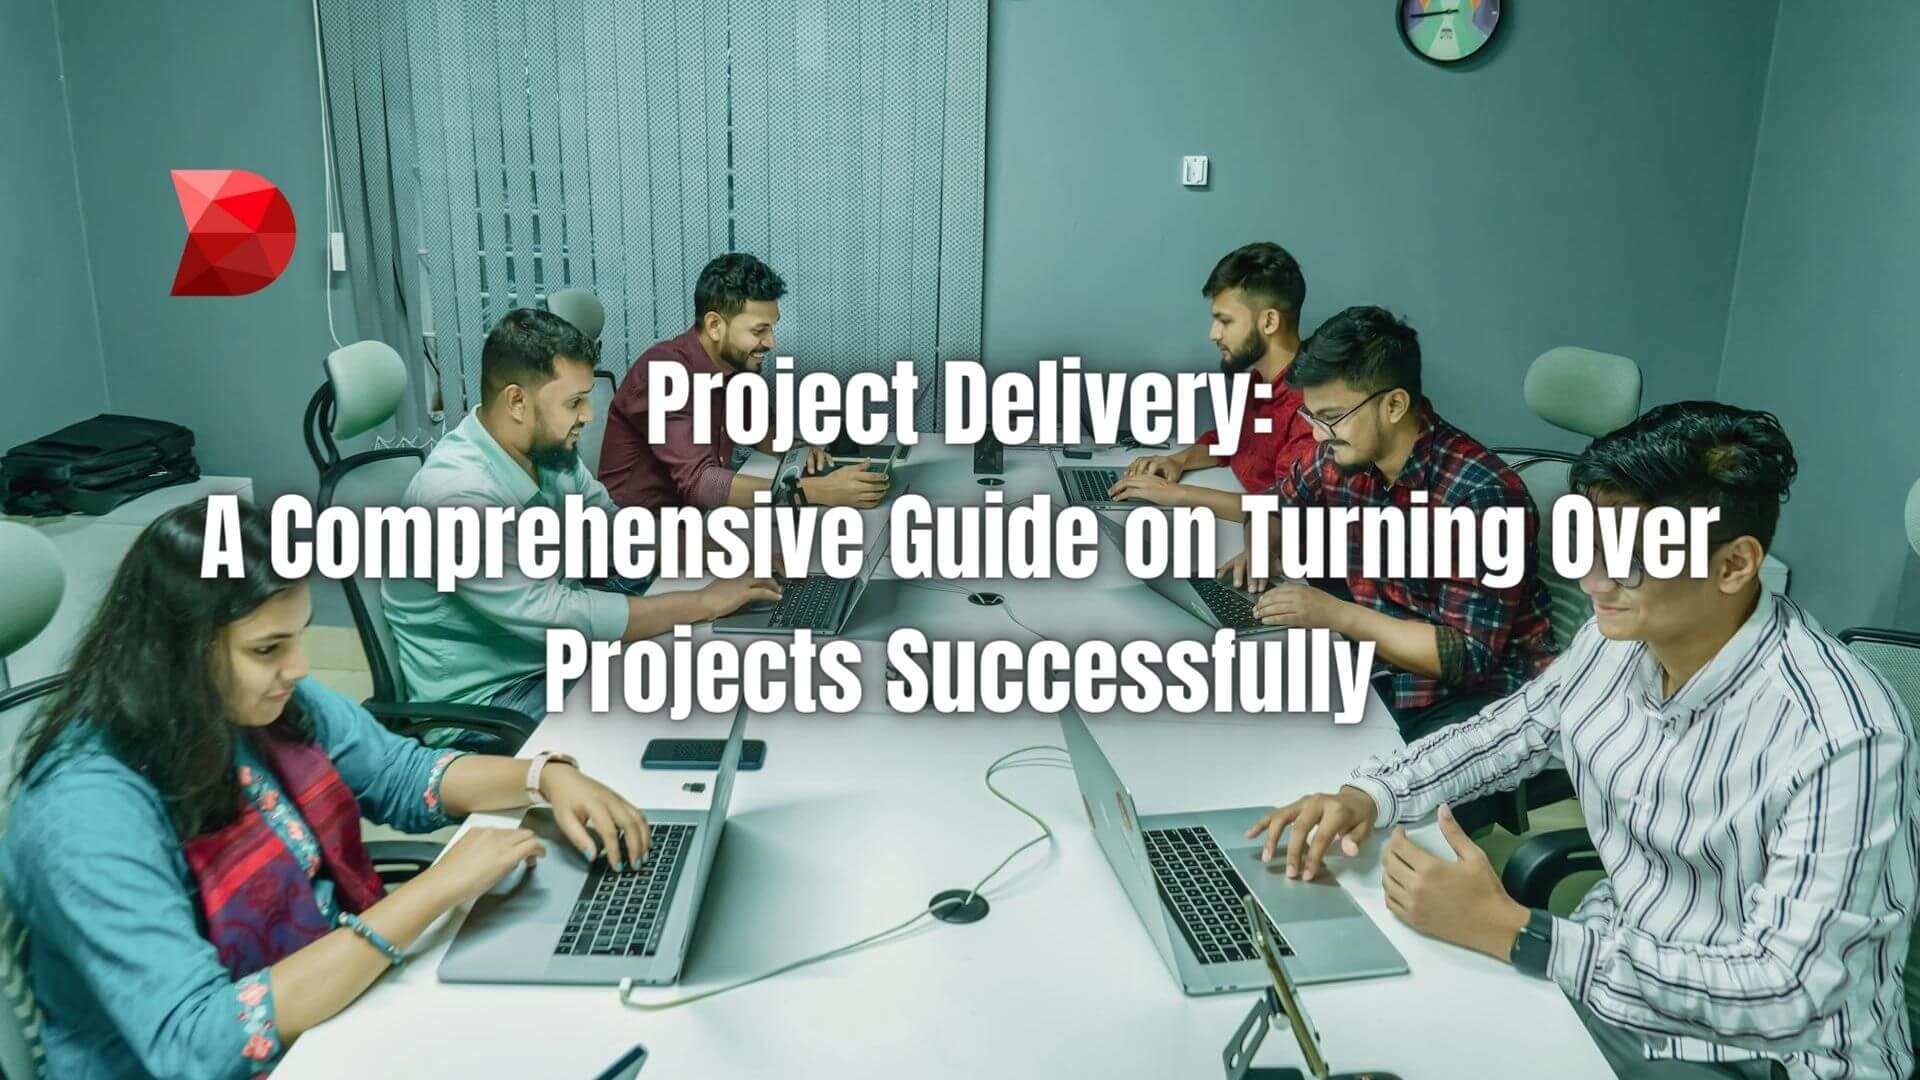 Unlock the secrets to successful project delivery with our guide. Turn over projects flawlessly with expert insights and techniques.